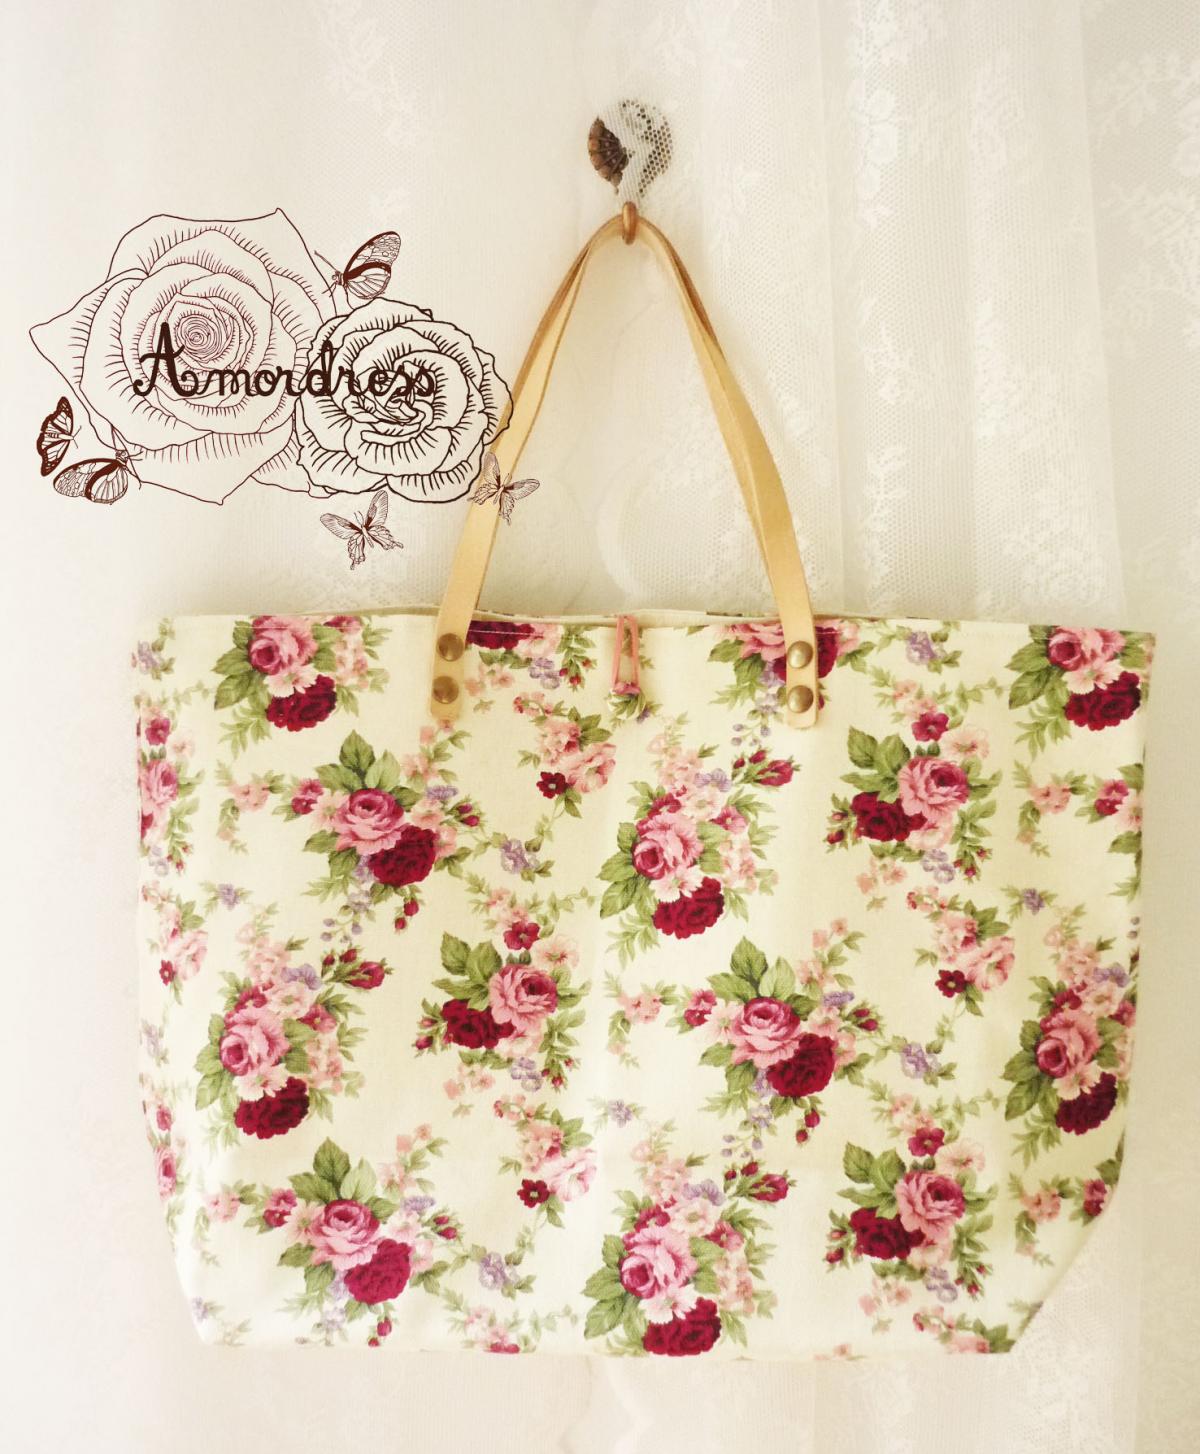 Floral Tote Bag Printed Canvas Bag Genuine Leather Strap Cream With Pink Rose Shabby Chic Bag ...amor The Inspired Collection...